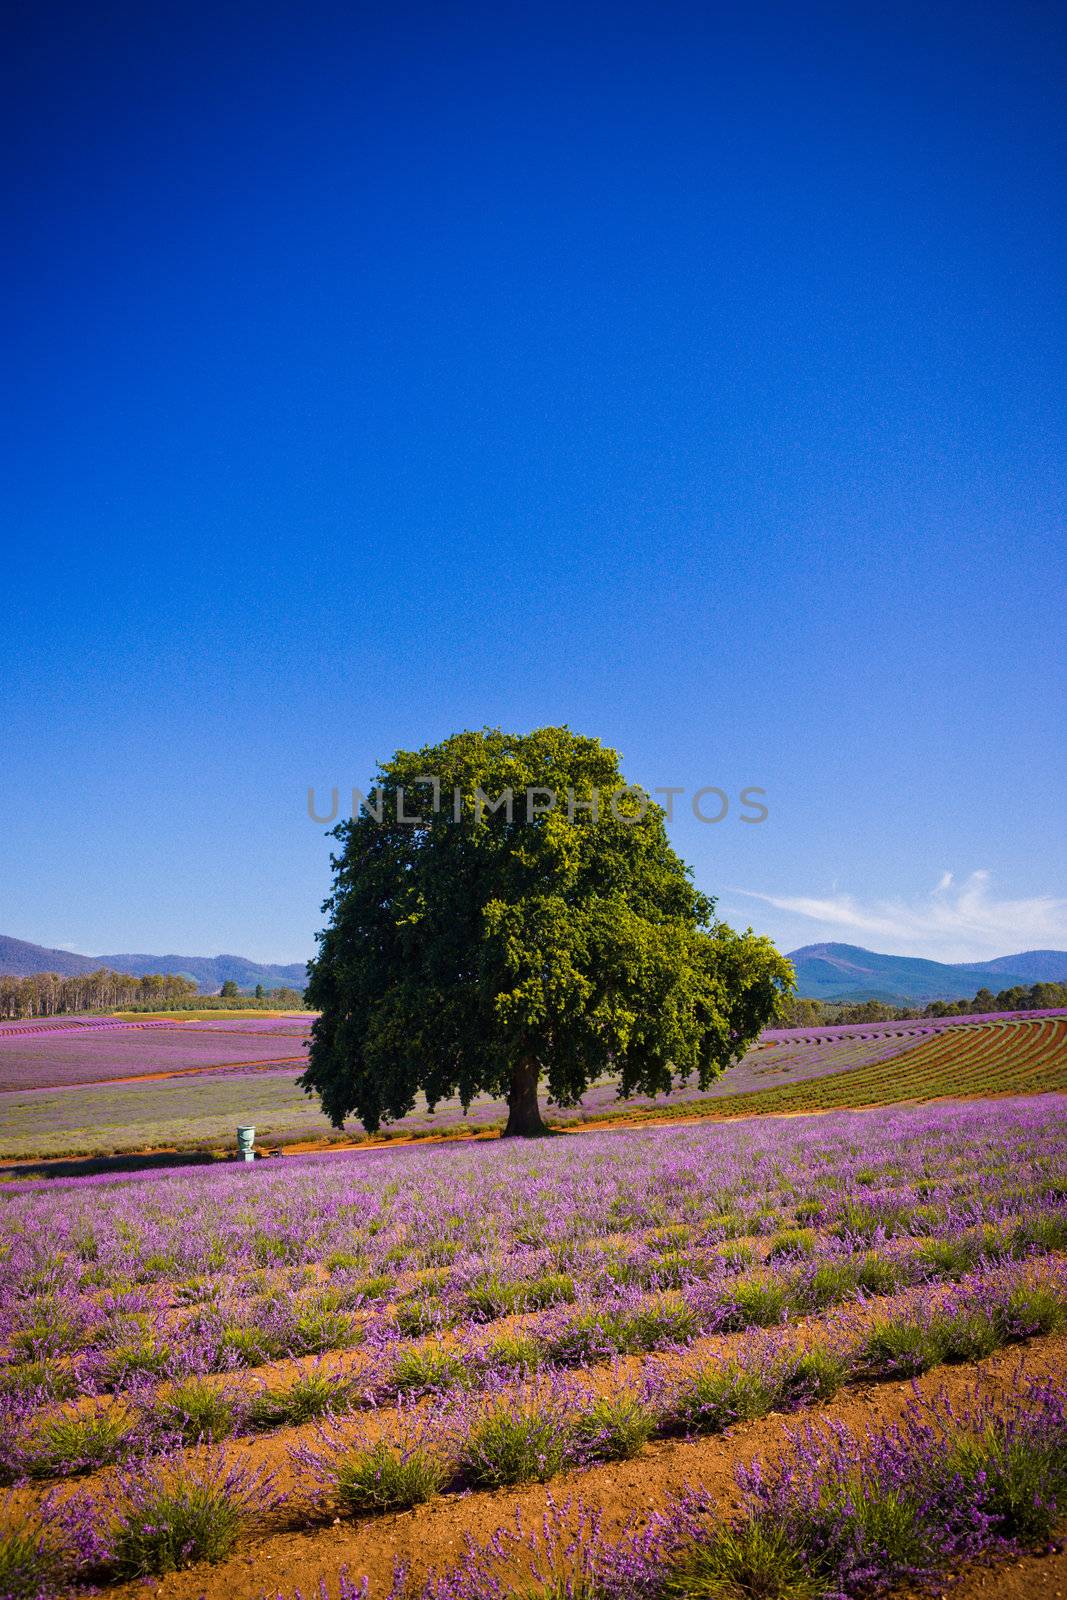 Single green tree standing in lavender fields with rows of young flowering lavender bushes with their purple flowers